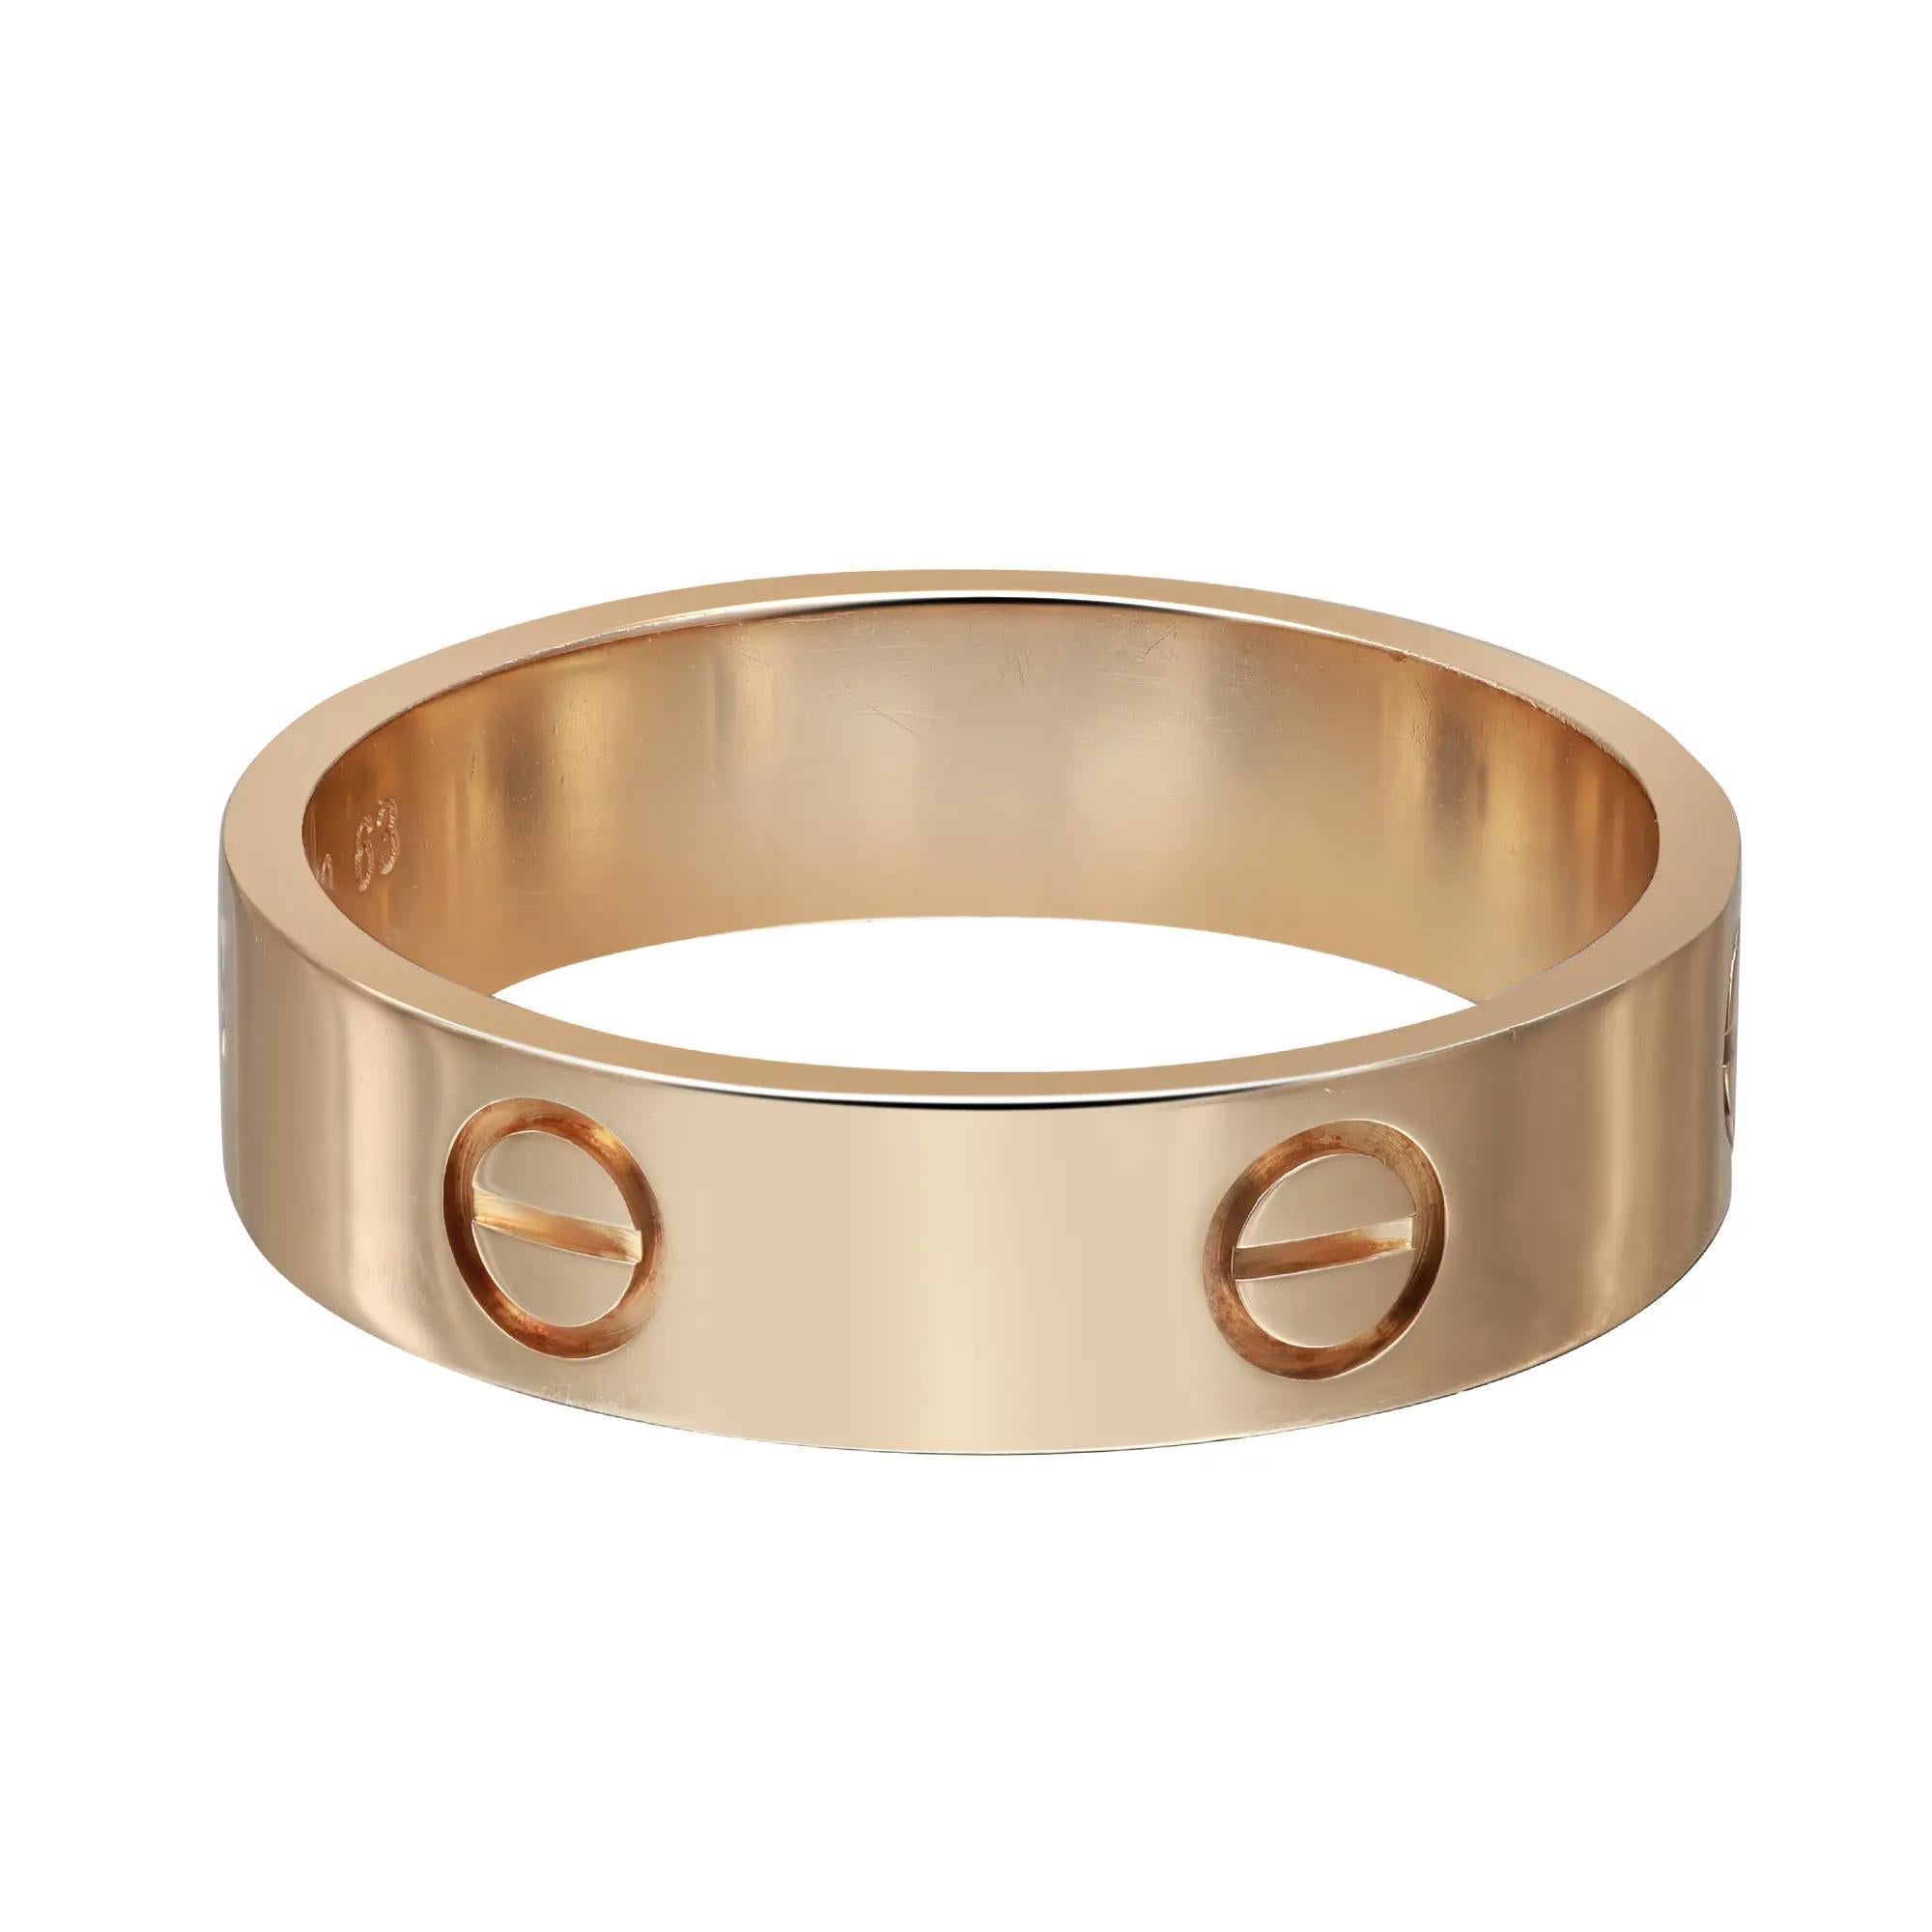 Cartier Love ring crafted in 18K yellow gold. Ring size 63 US 10.5. Width: 5.6mm. Total weight: 7.11 grams. Great pre-owned condition. Original box and paper are not included. Comes with a Chronostore appraisal and a presentable gift box.  
